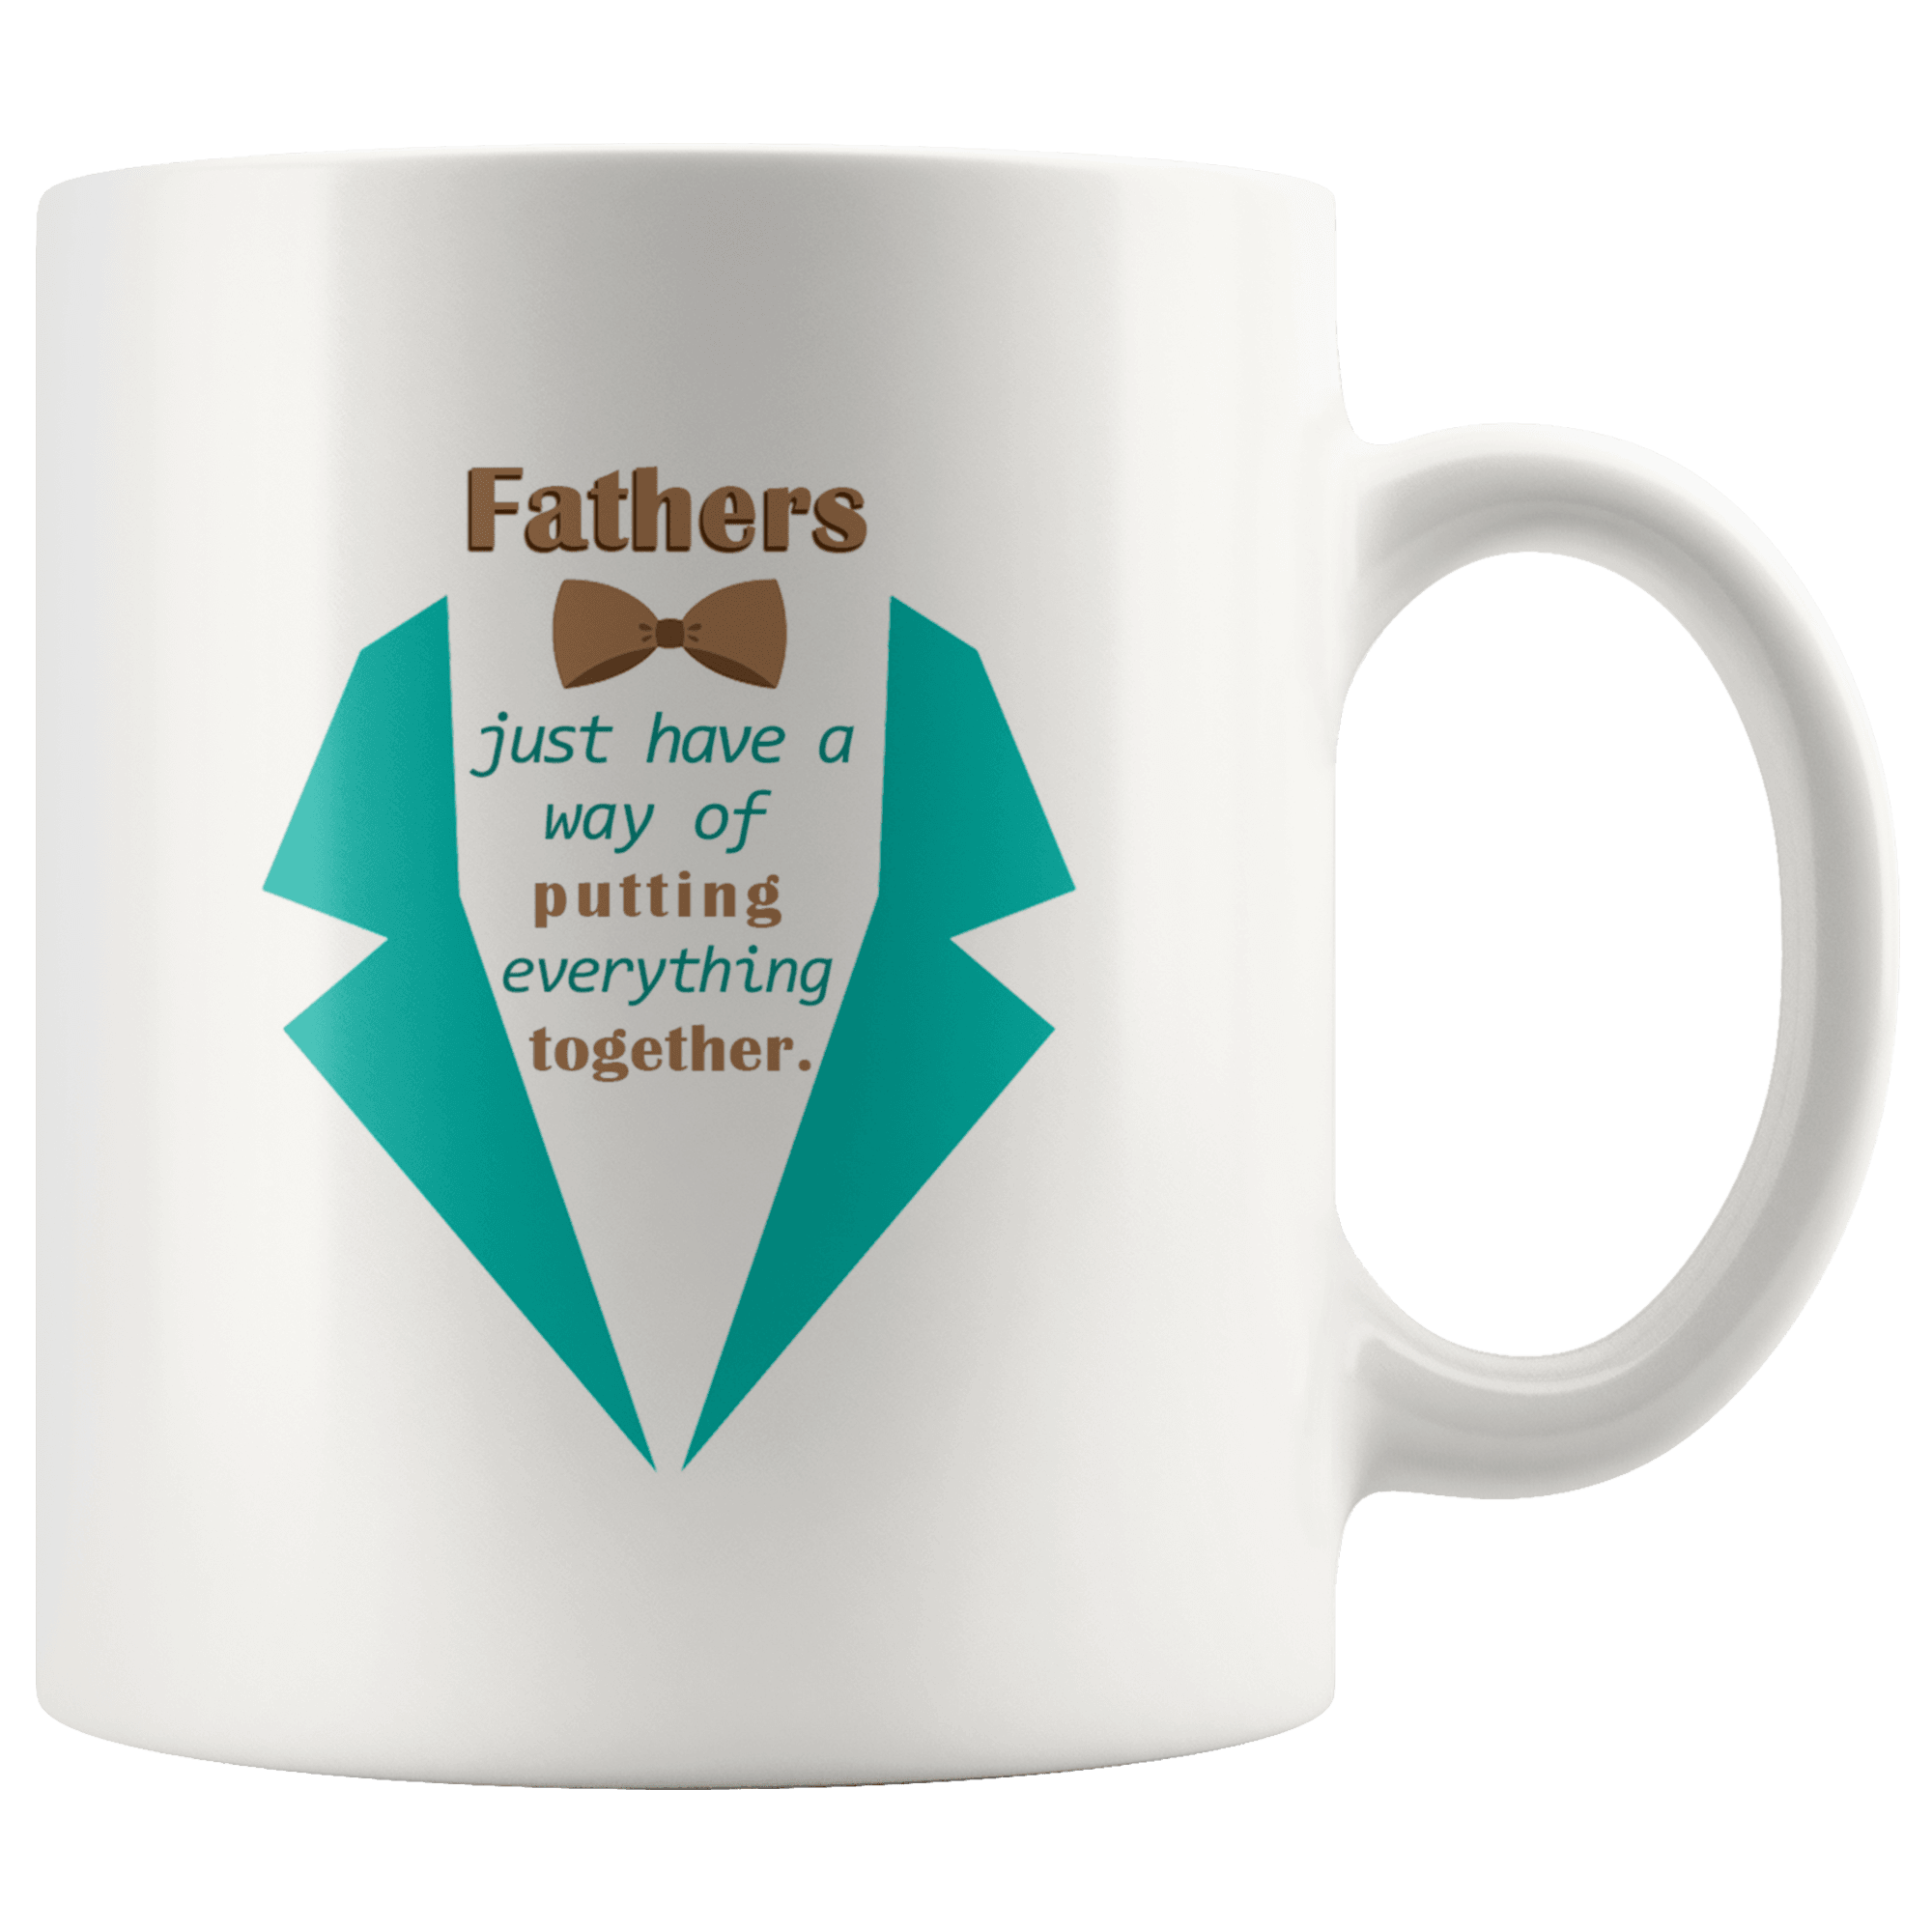 Great Coffee Mug For Father - Fathers Just Have A Way Of Putting Everything Together - SPCM